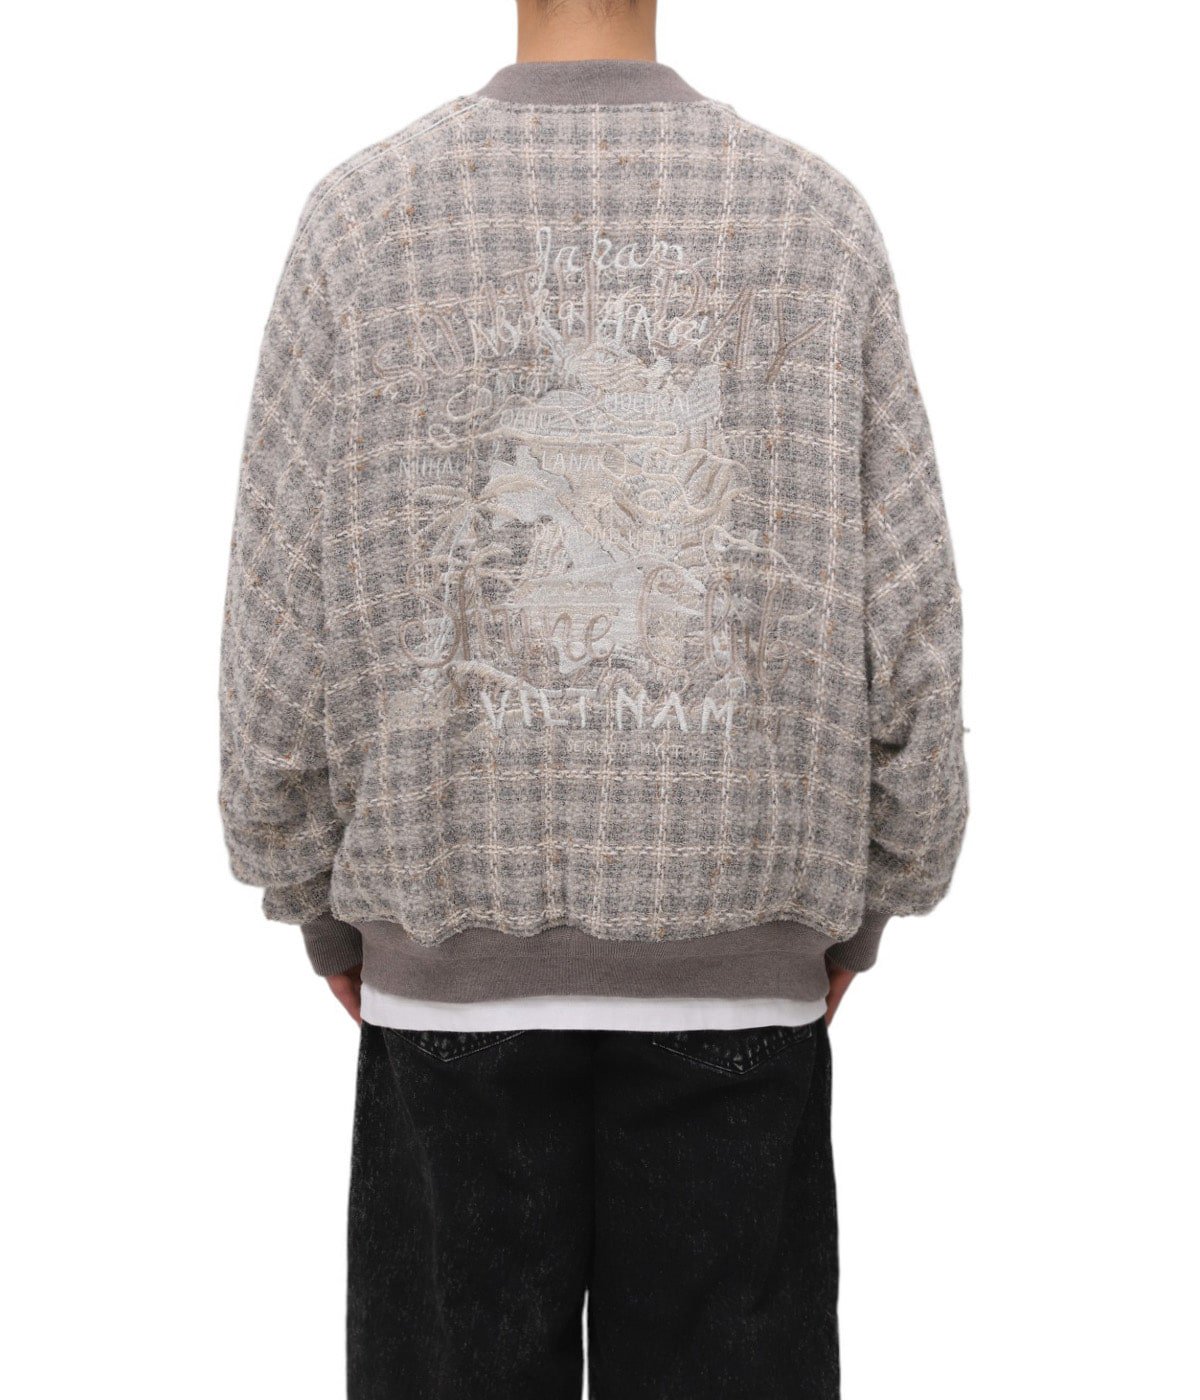 TWEED SOUVENIOR JACKET | doublet(ダブレット) / アウター ブルゾン 